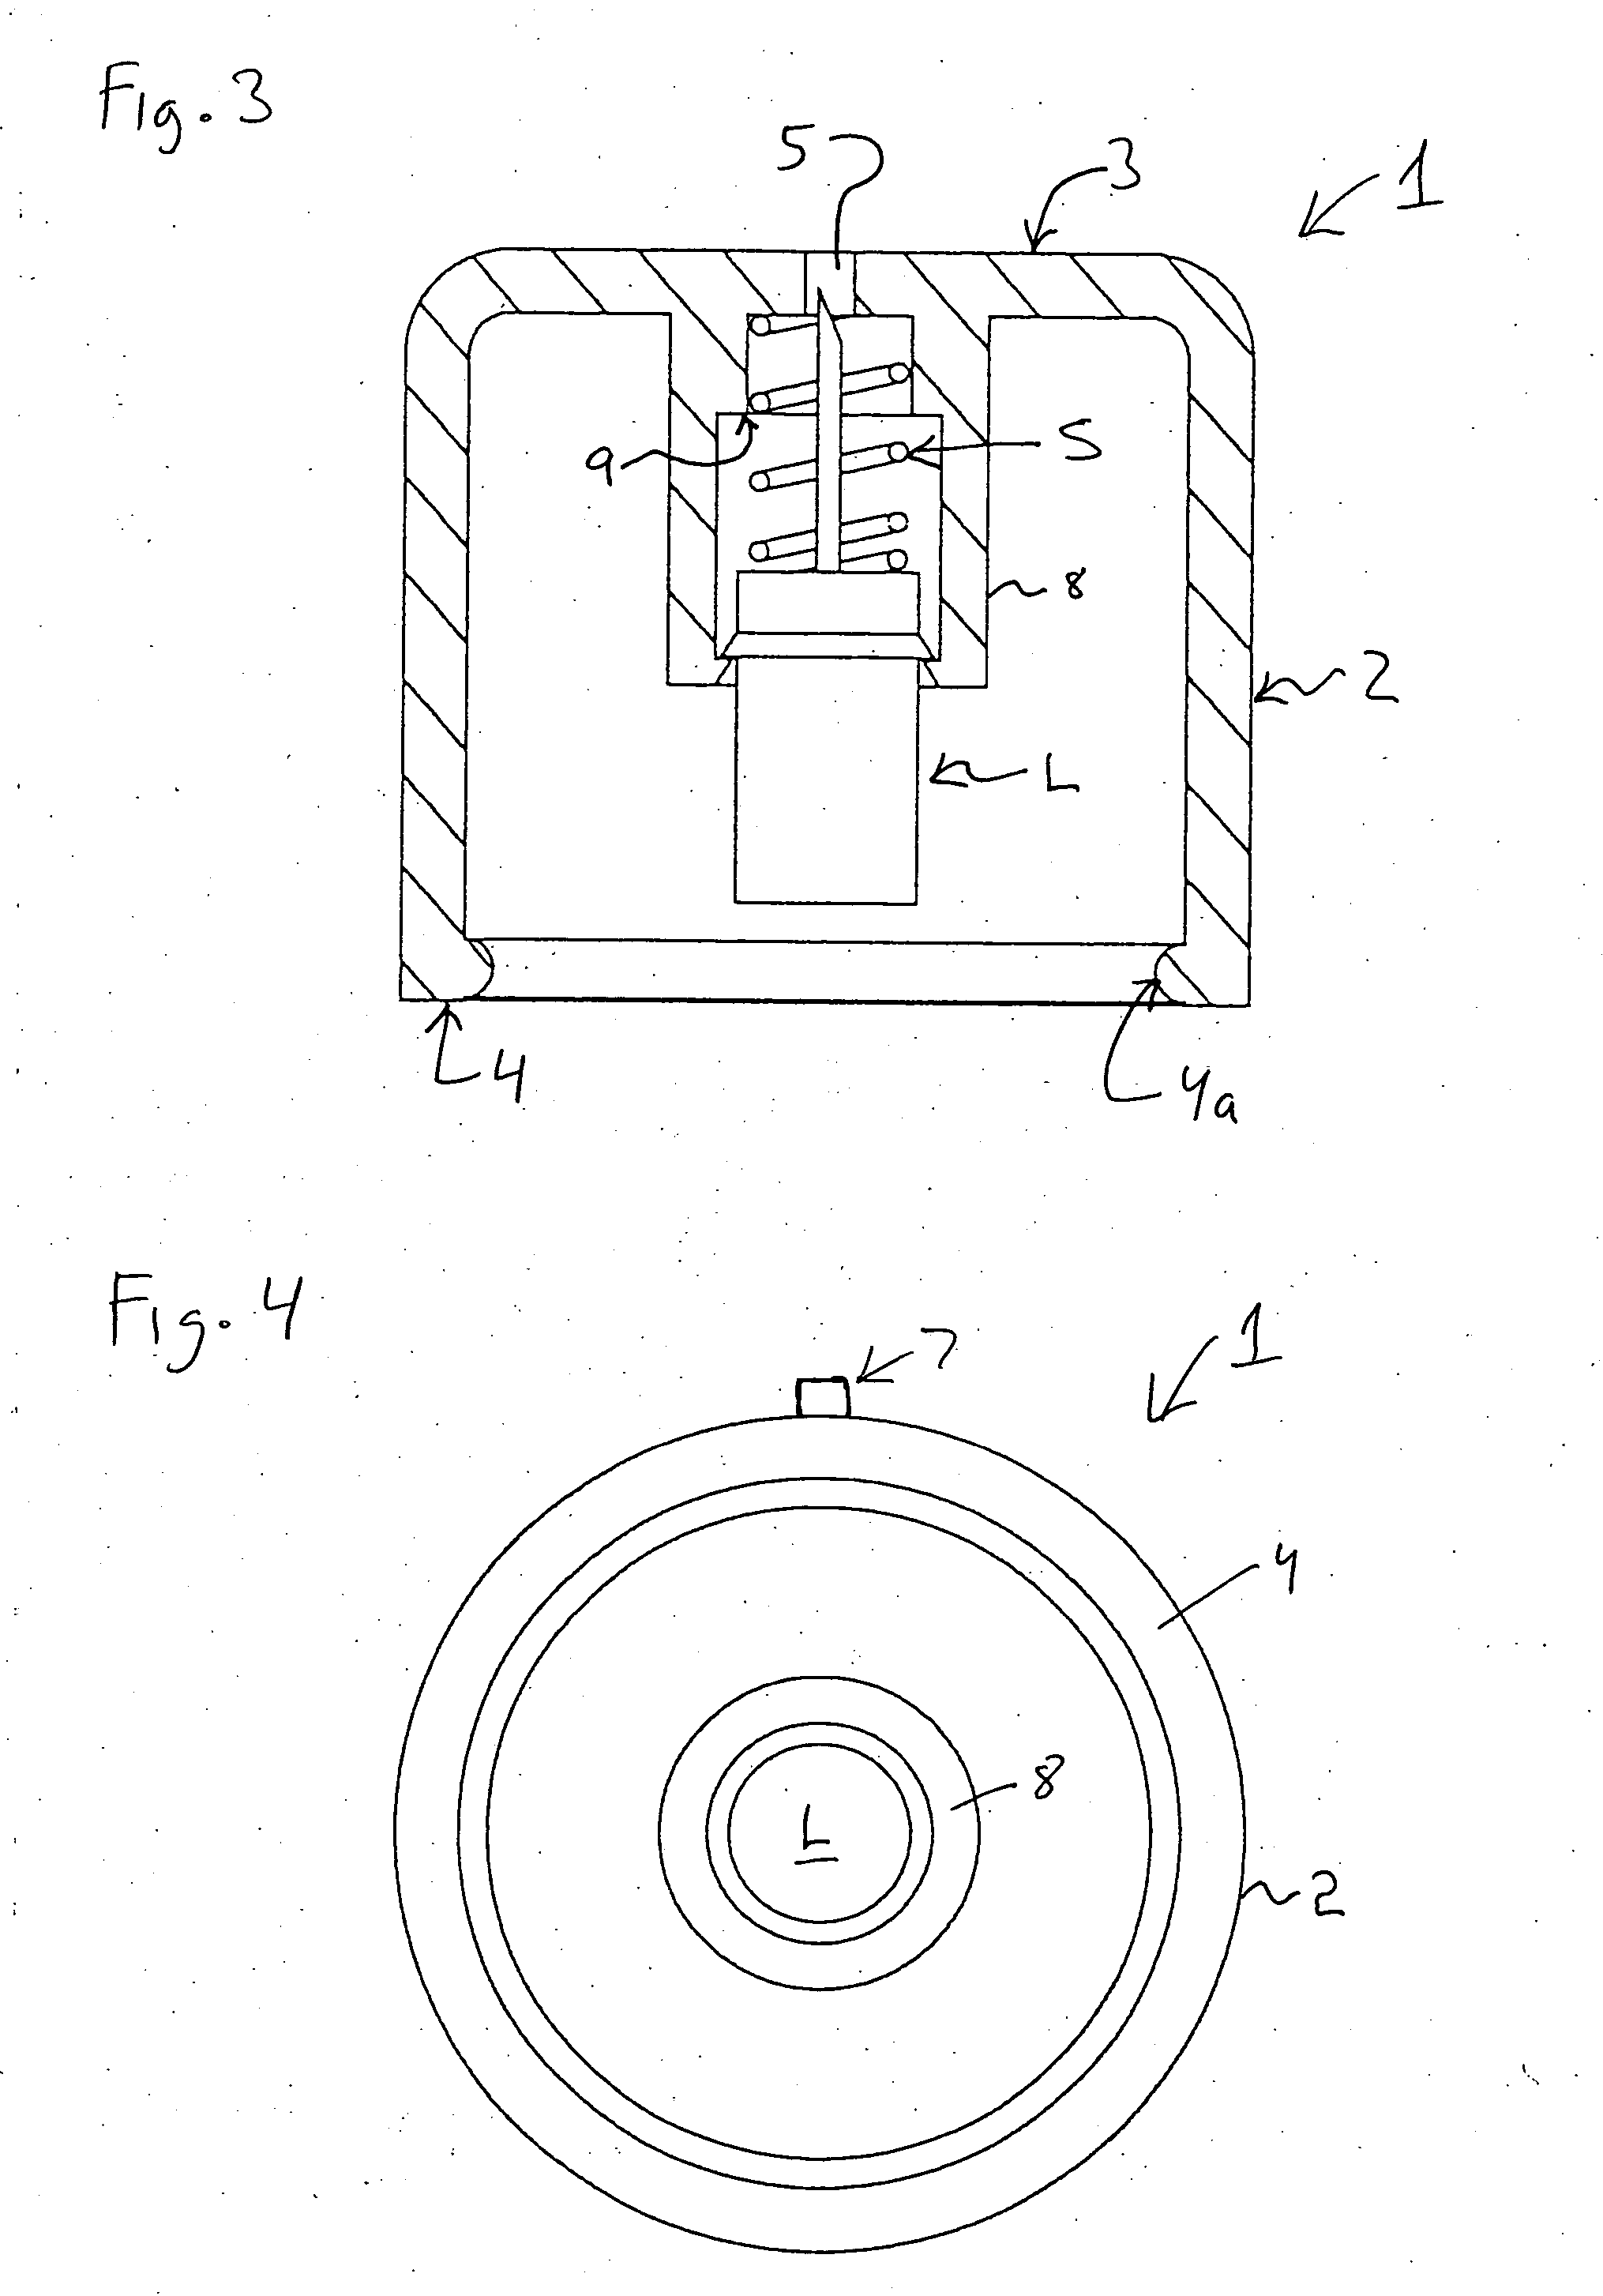 Disposable lancet device cap with integral lancet and/or test strip and testing device utilizing the cap